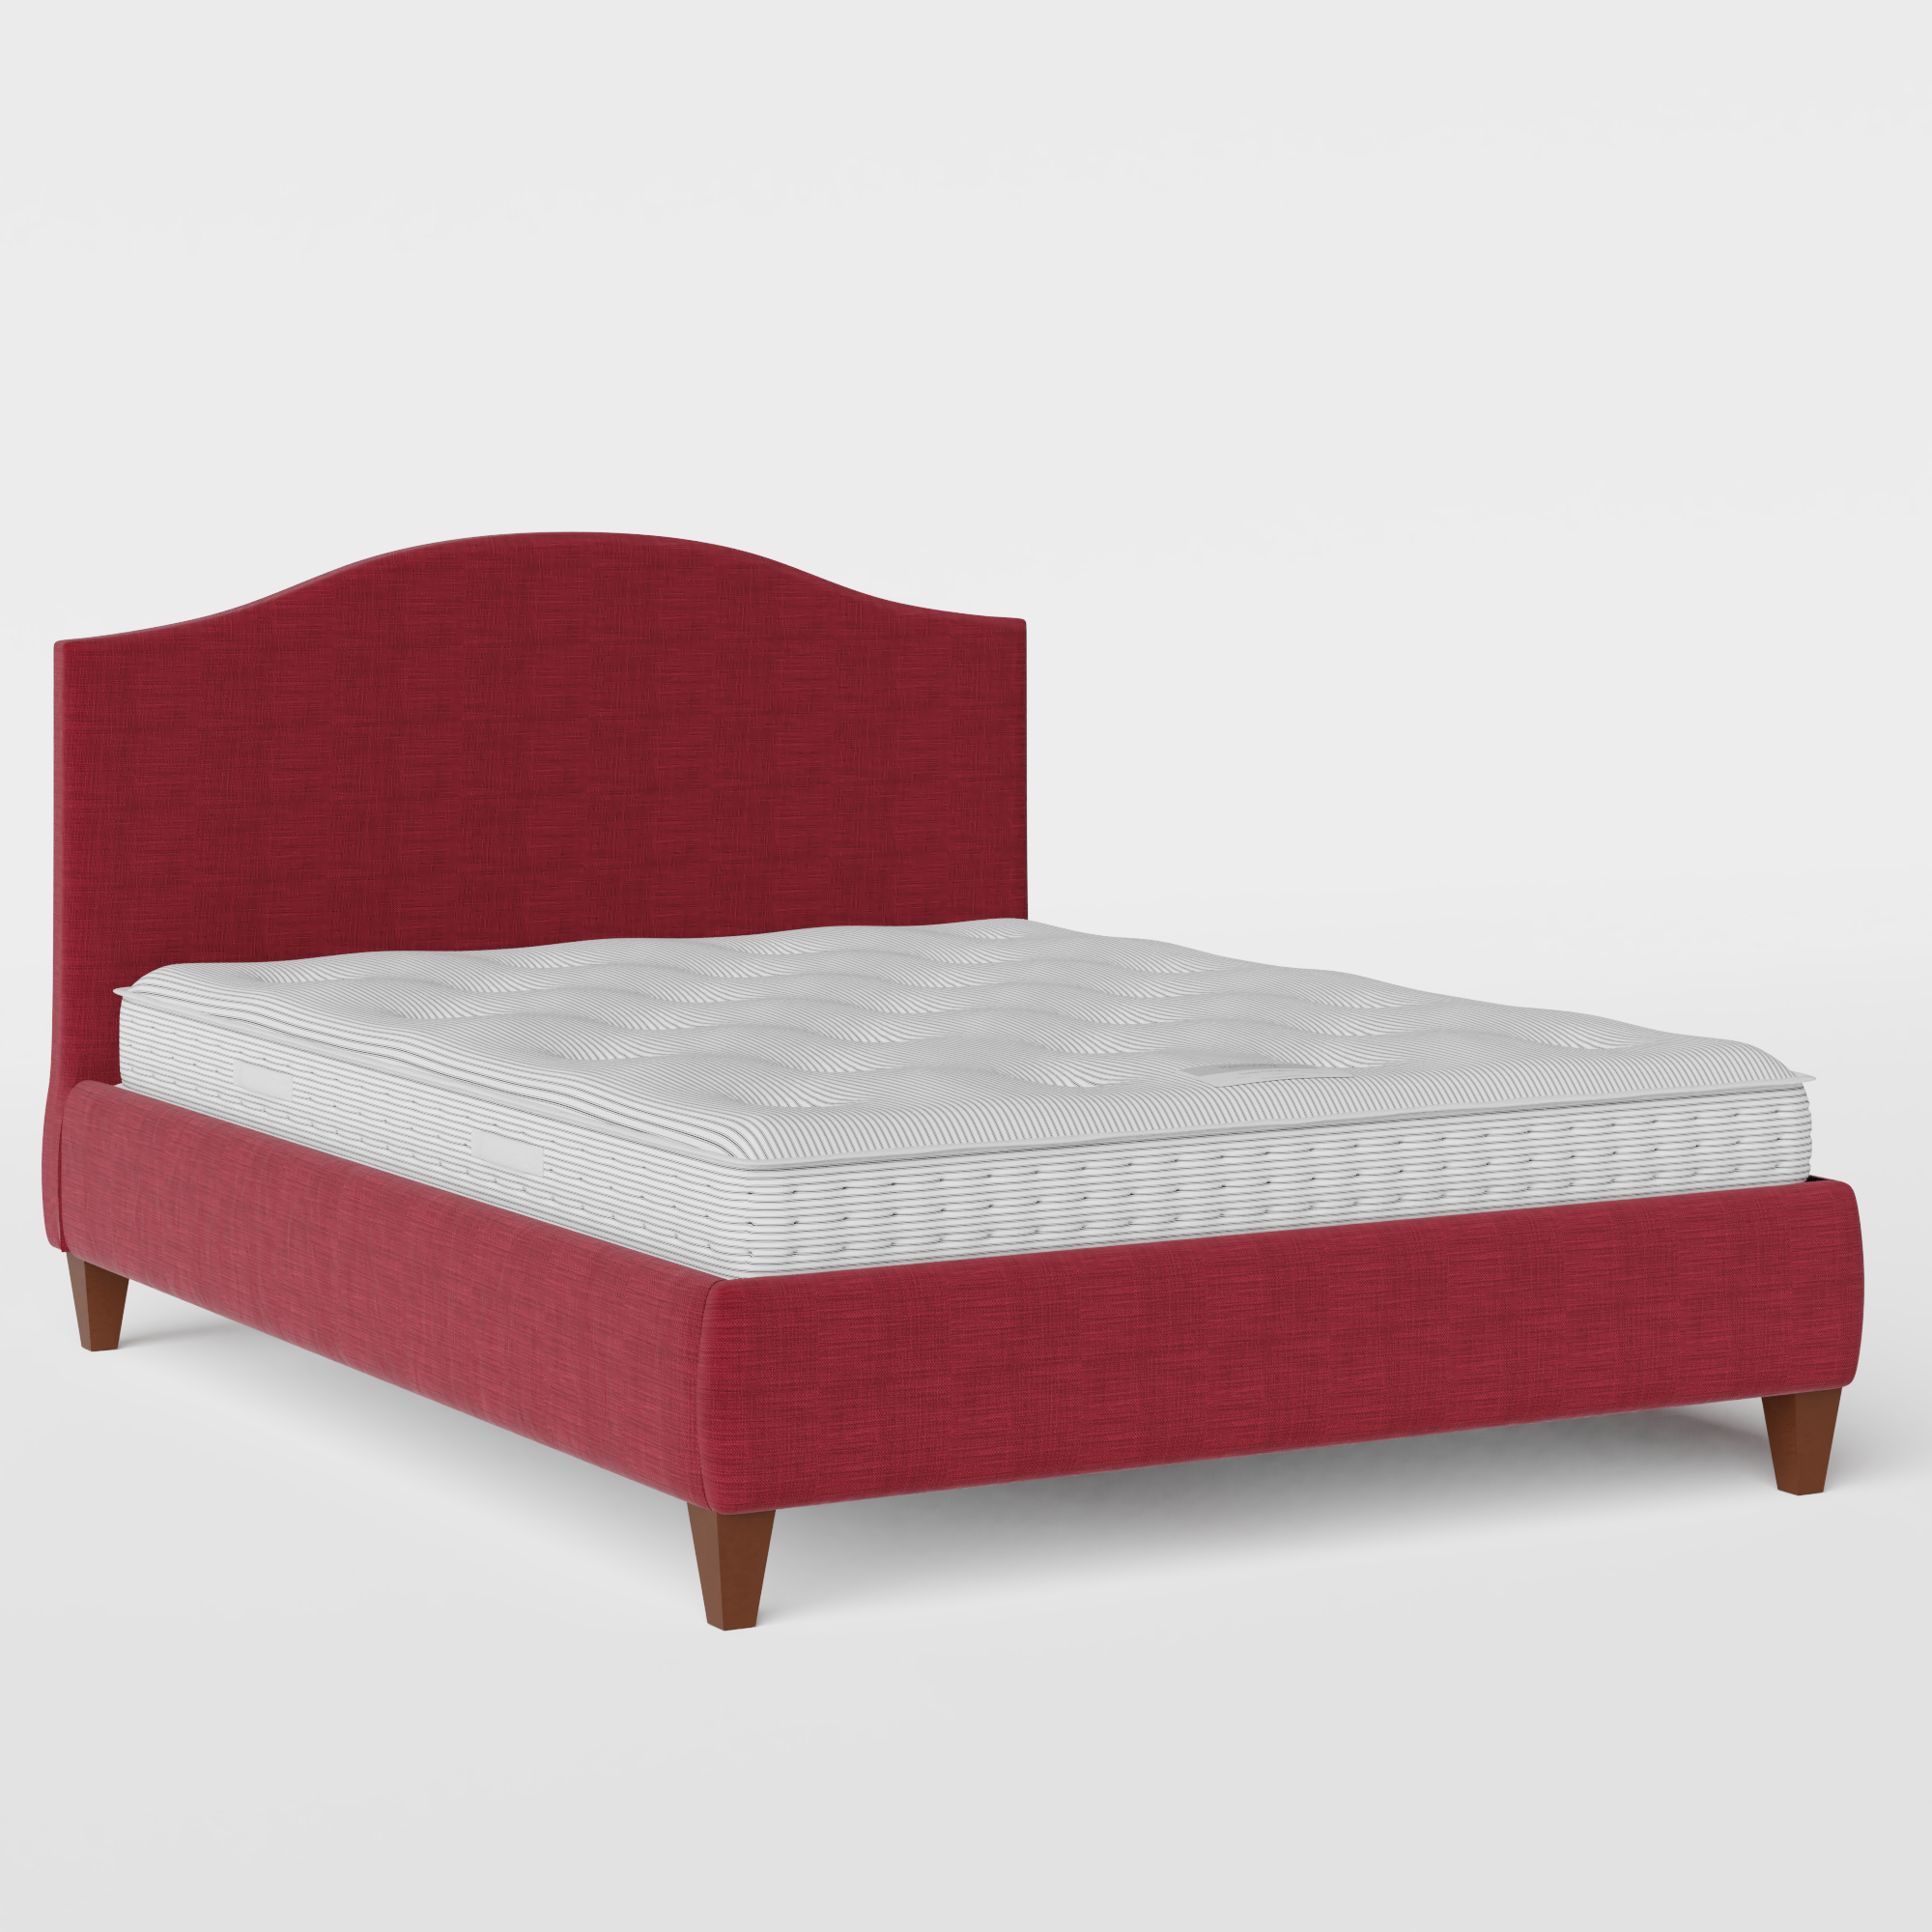 Daniella upholstered bed in cherry fabric